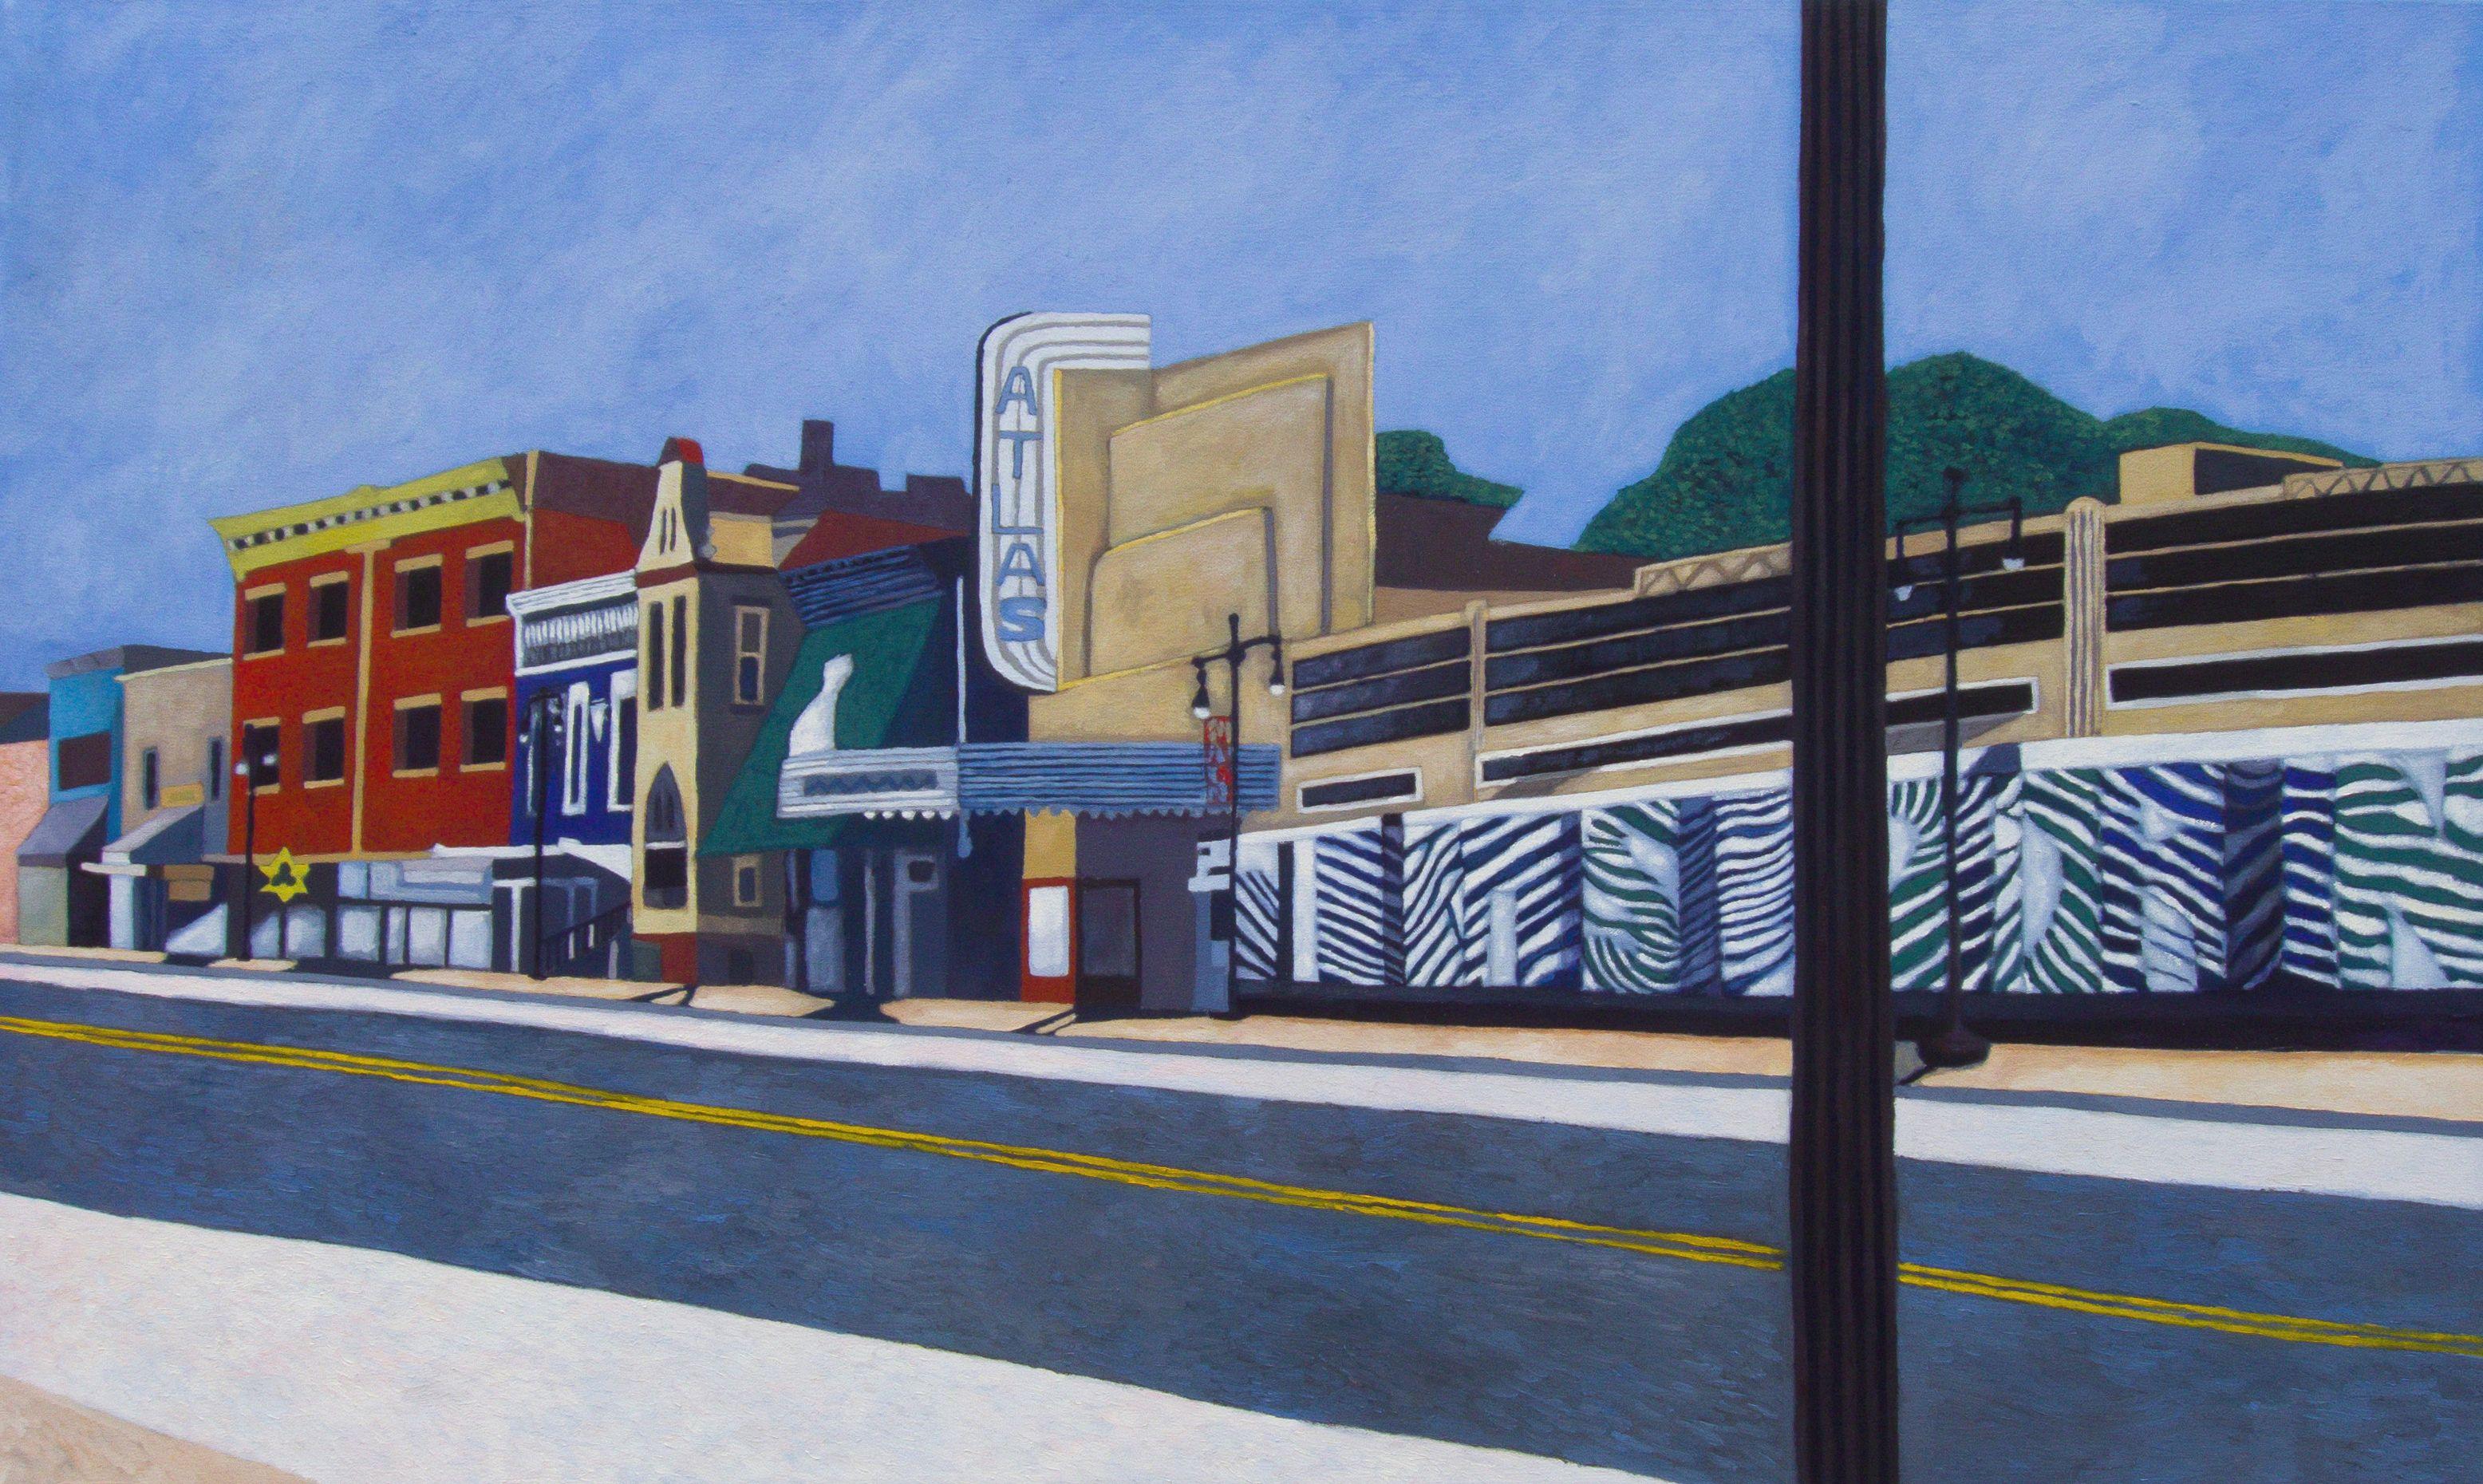 This is a painting of H Street -- also known as the Atlas District, and is a revitalized arts and entertainment district located in the Near Northeast neighborhood of Washington, DC. I was inspired by the aging buildings -- many dating back to the